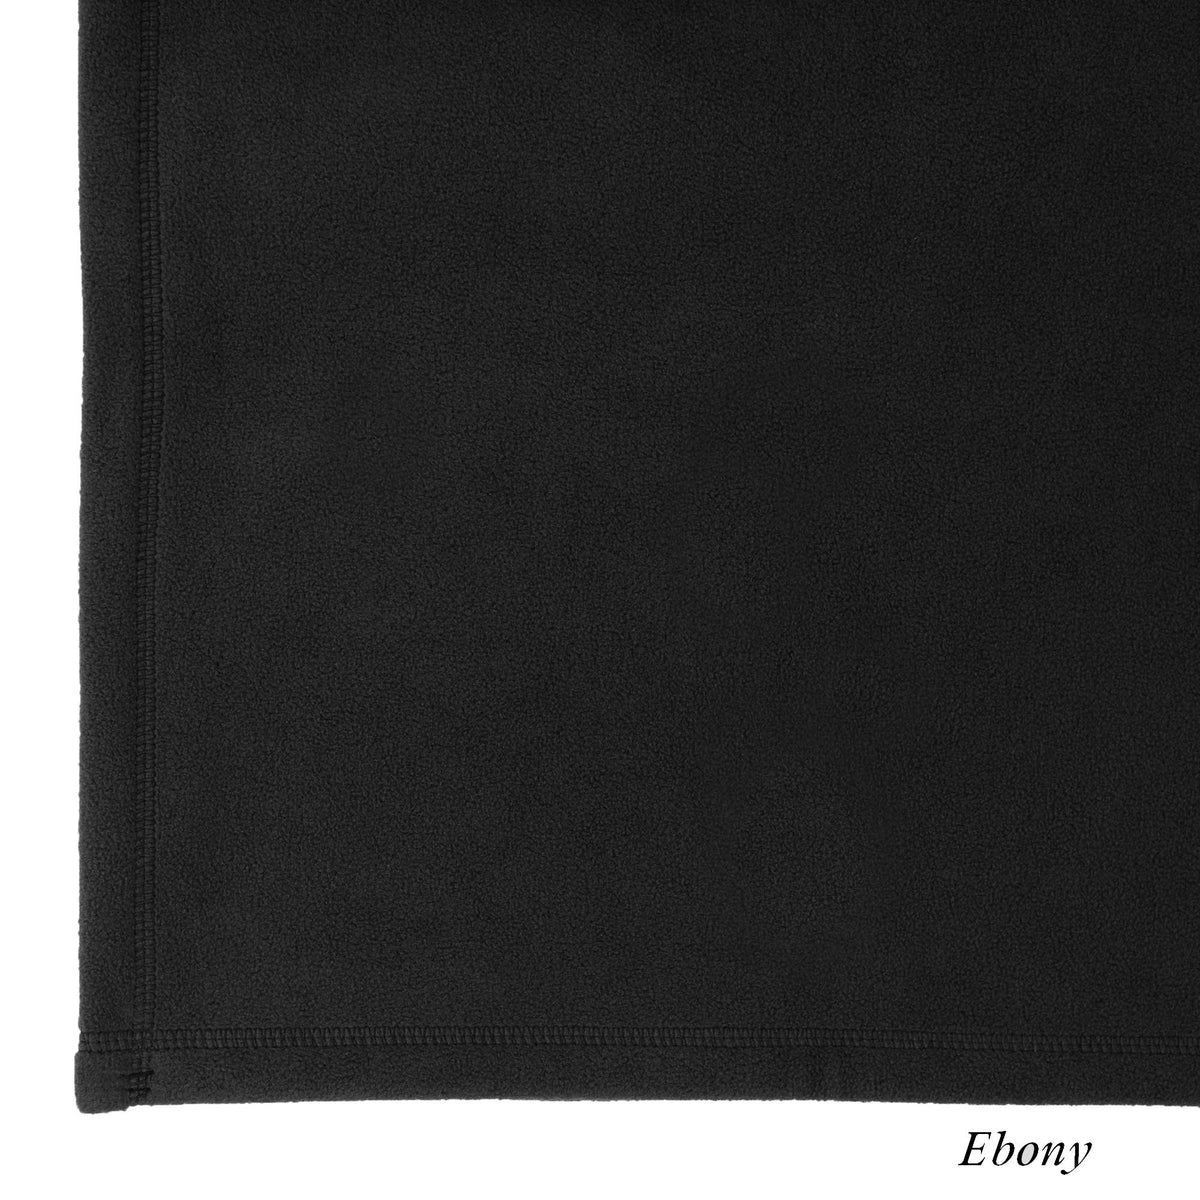 Ebony -  Biggest Picnic Blankets - Peaceful Touch - American Blanket Company